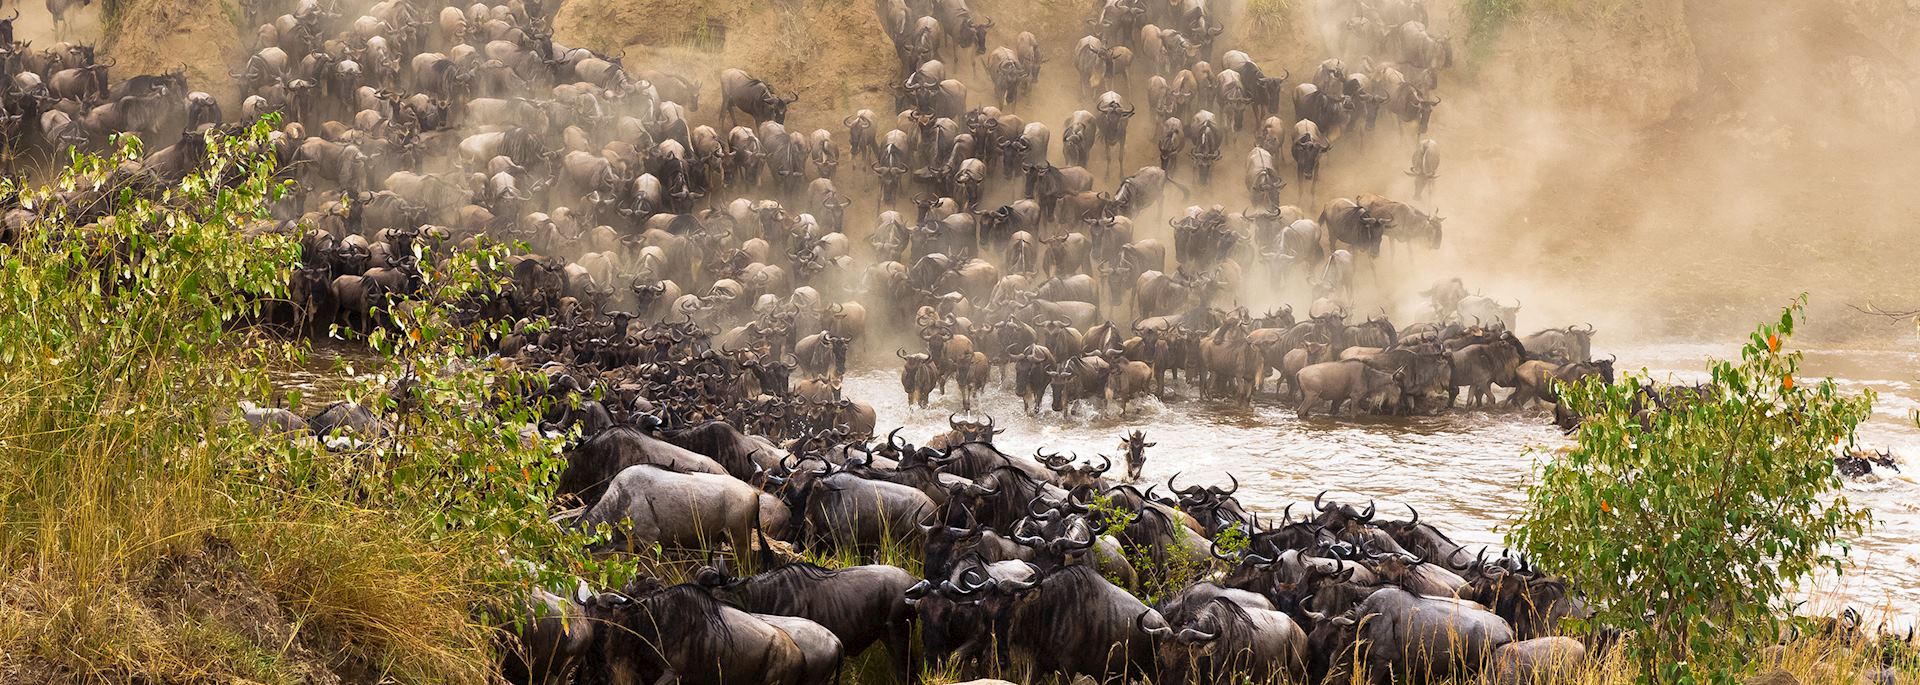 Wildebeest river crossing during the Great Migration, Kenya